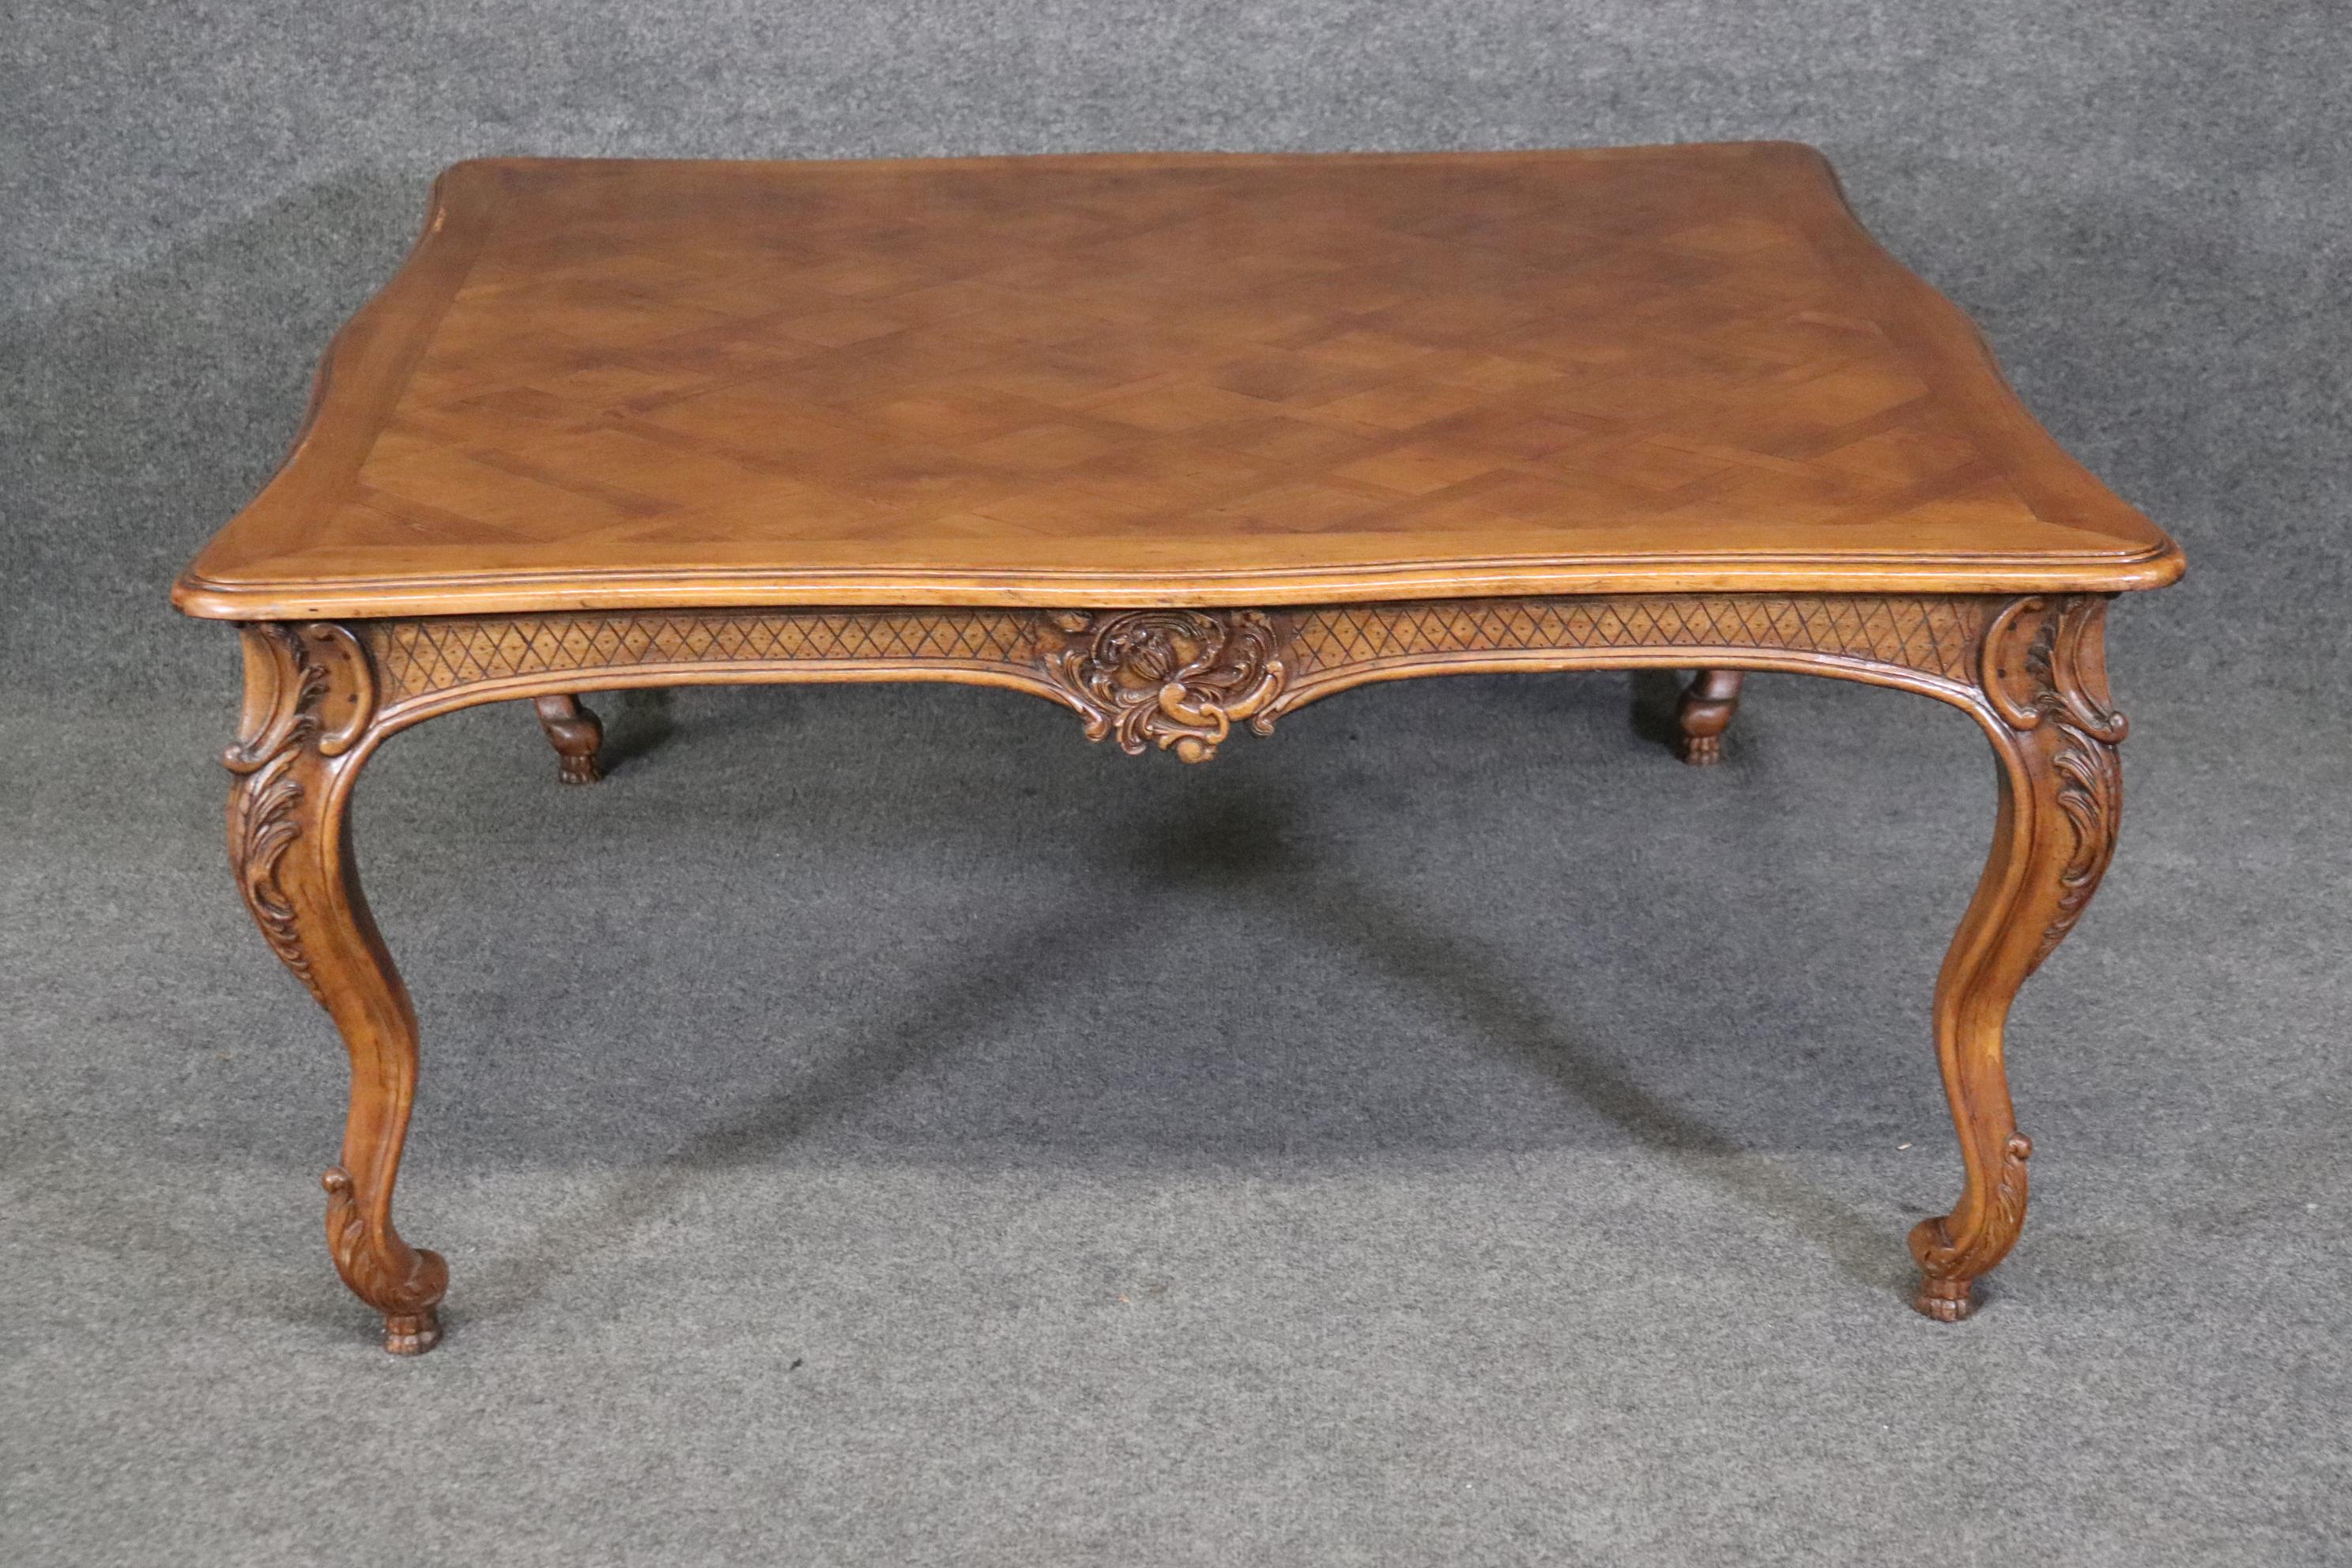 Dimensions- H: 21 1/4in W: 46 3/4in D: 46 1/2in 
This Louis XV Country French Style Coffee Table Attributed to Bodart is made of the highest quality and is perfect for you and your home! Although not signed this piece is believed to be by Bodart or